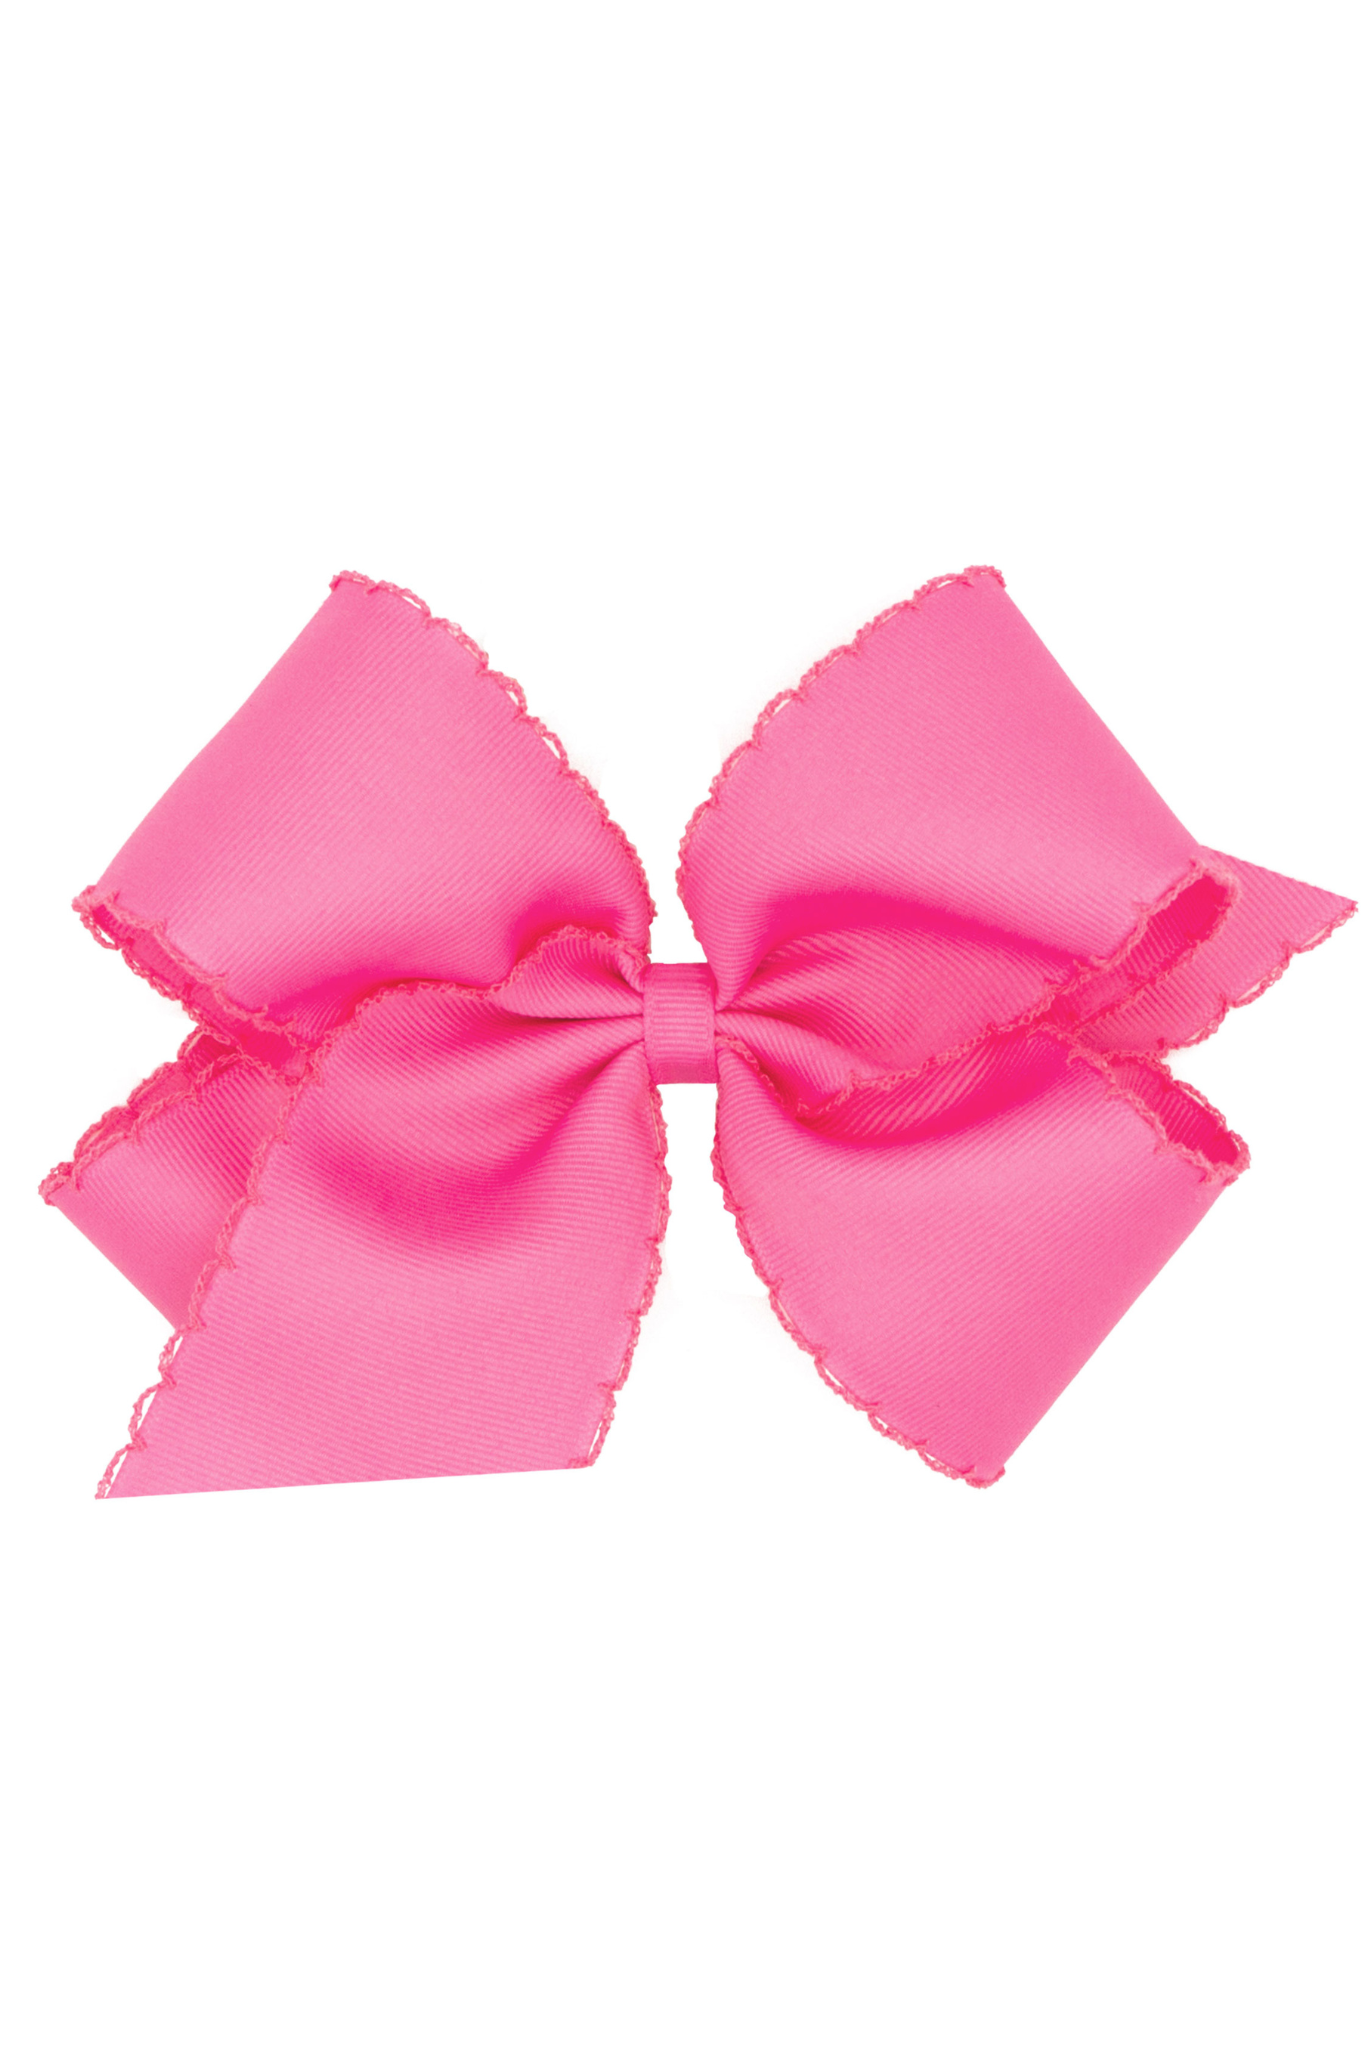 King Grosgrain Bow with Matching MoonStitch Edge (Multiple Color Options)